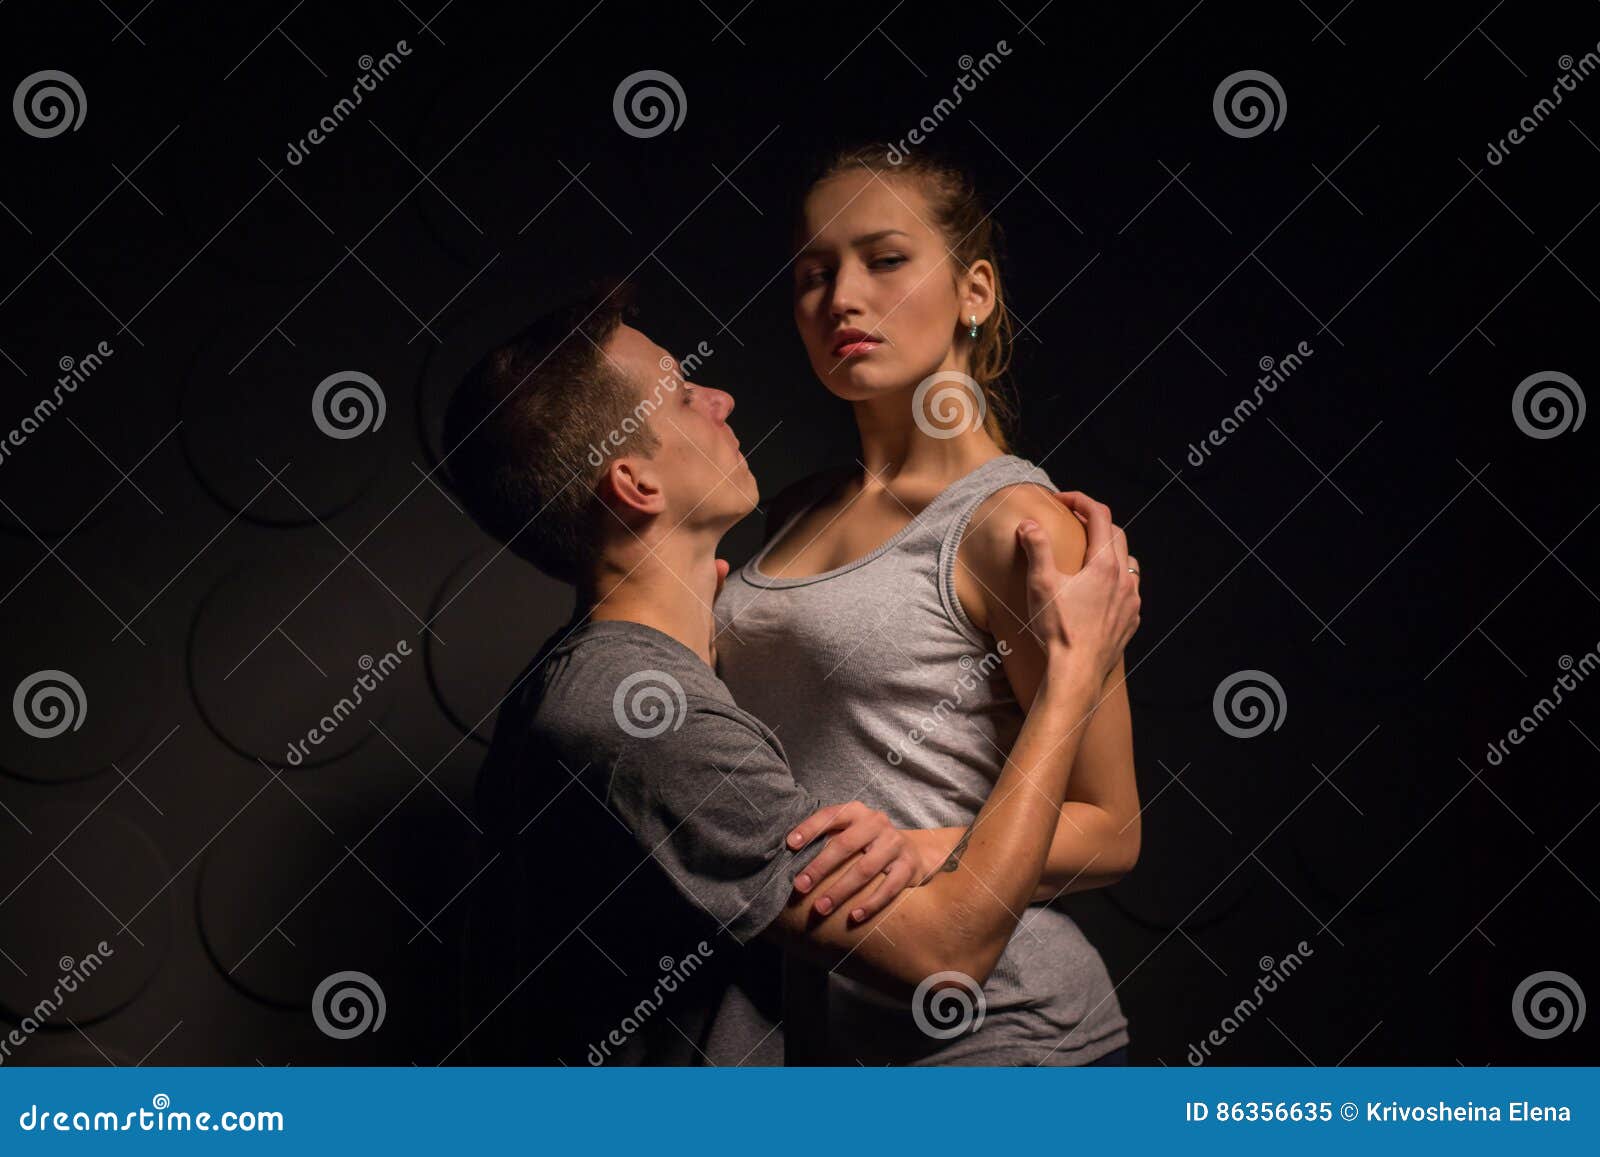 Passionate Young Couple In The Room Stock Image Image Of Rough Love